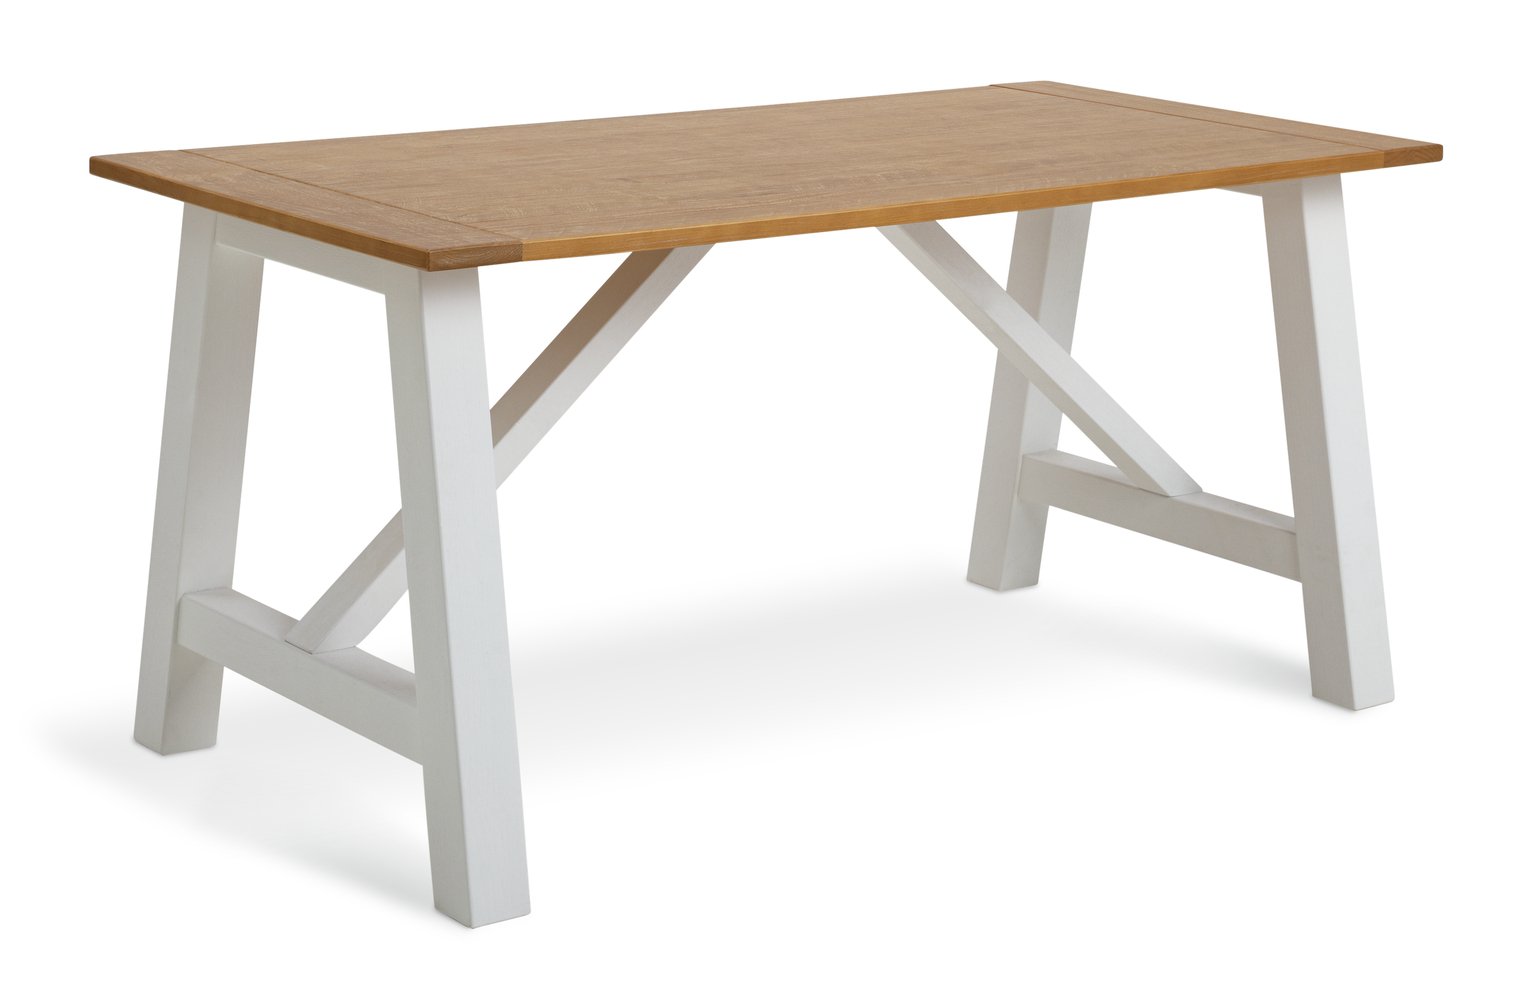 Habitat Burford Solid Wood 4 Seater Dining Table - White